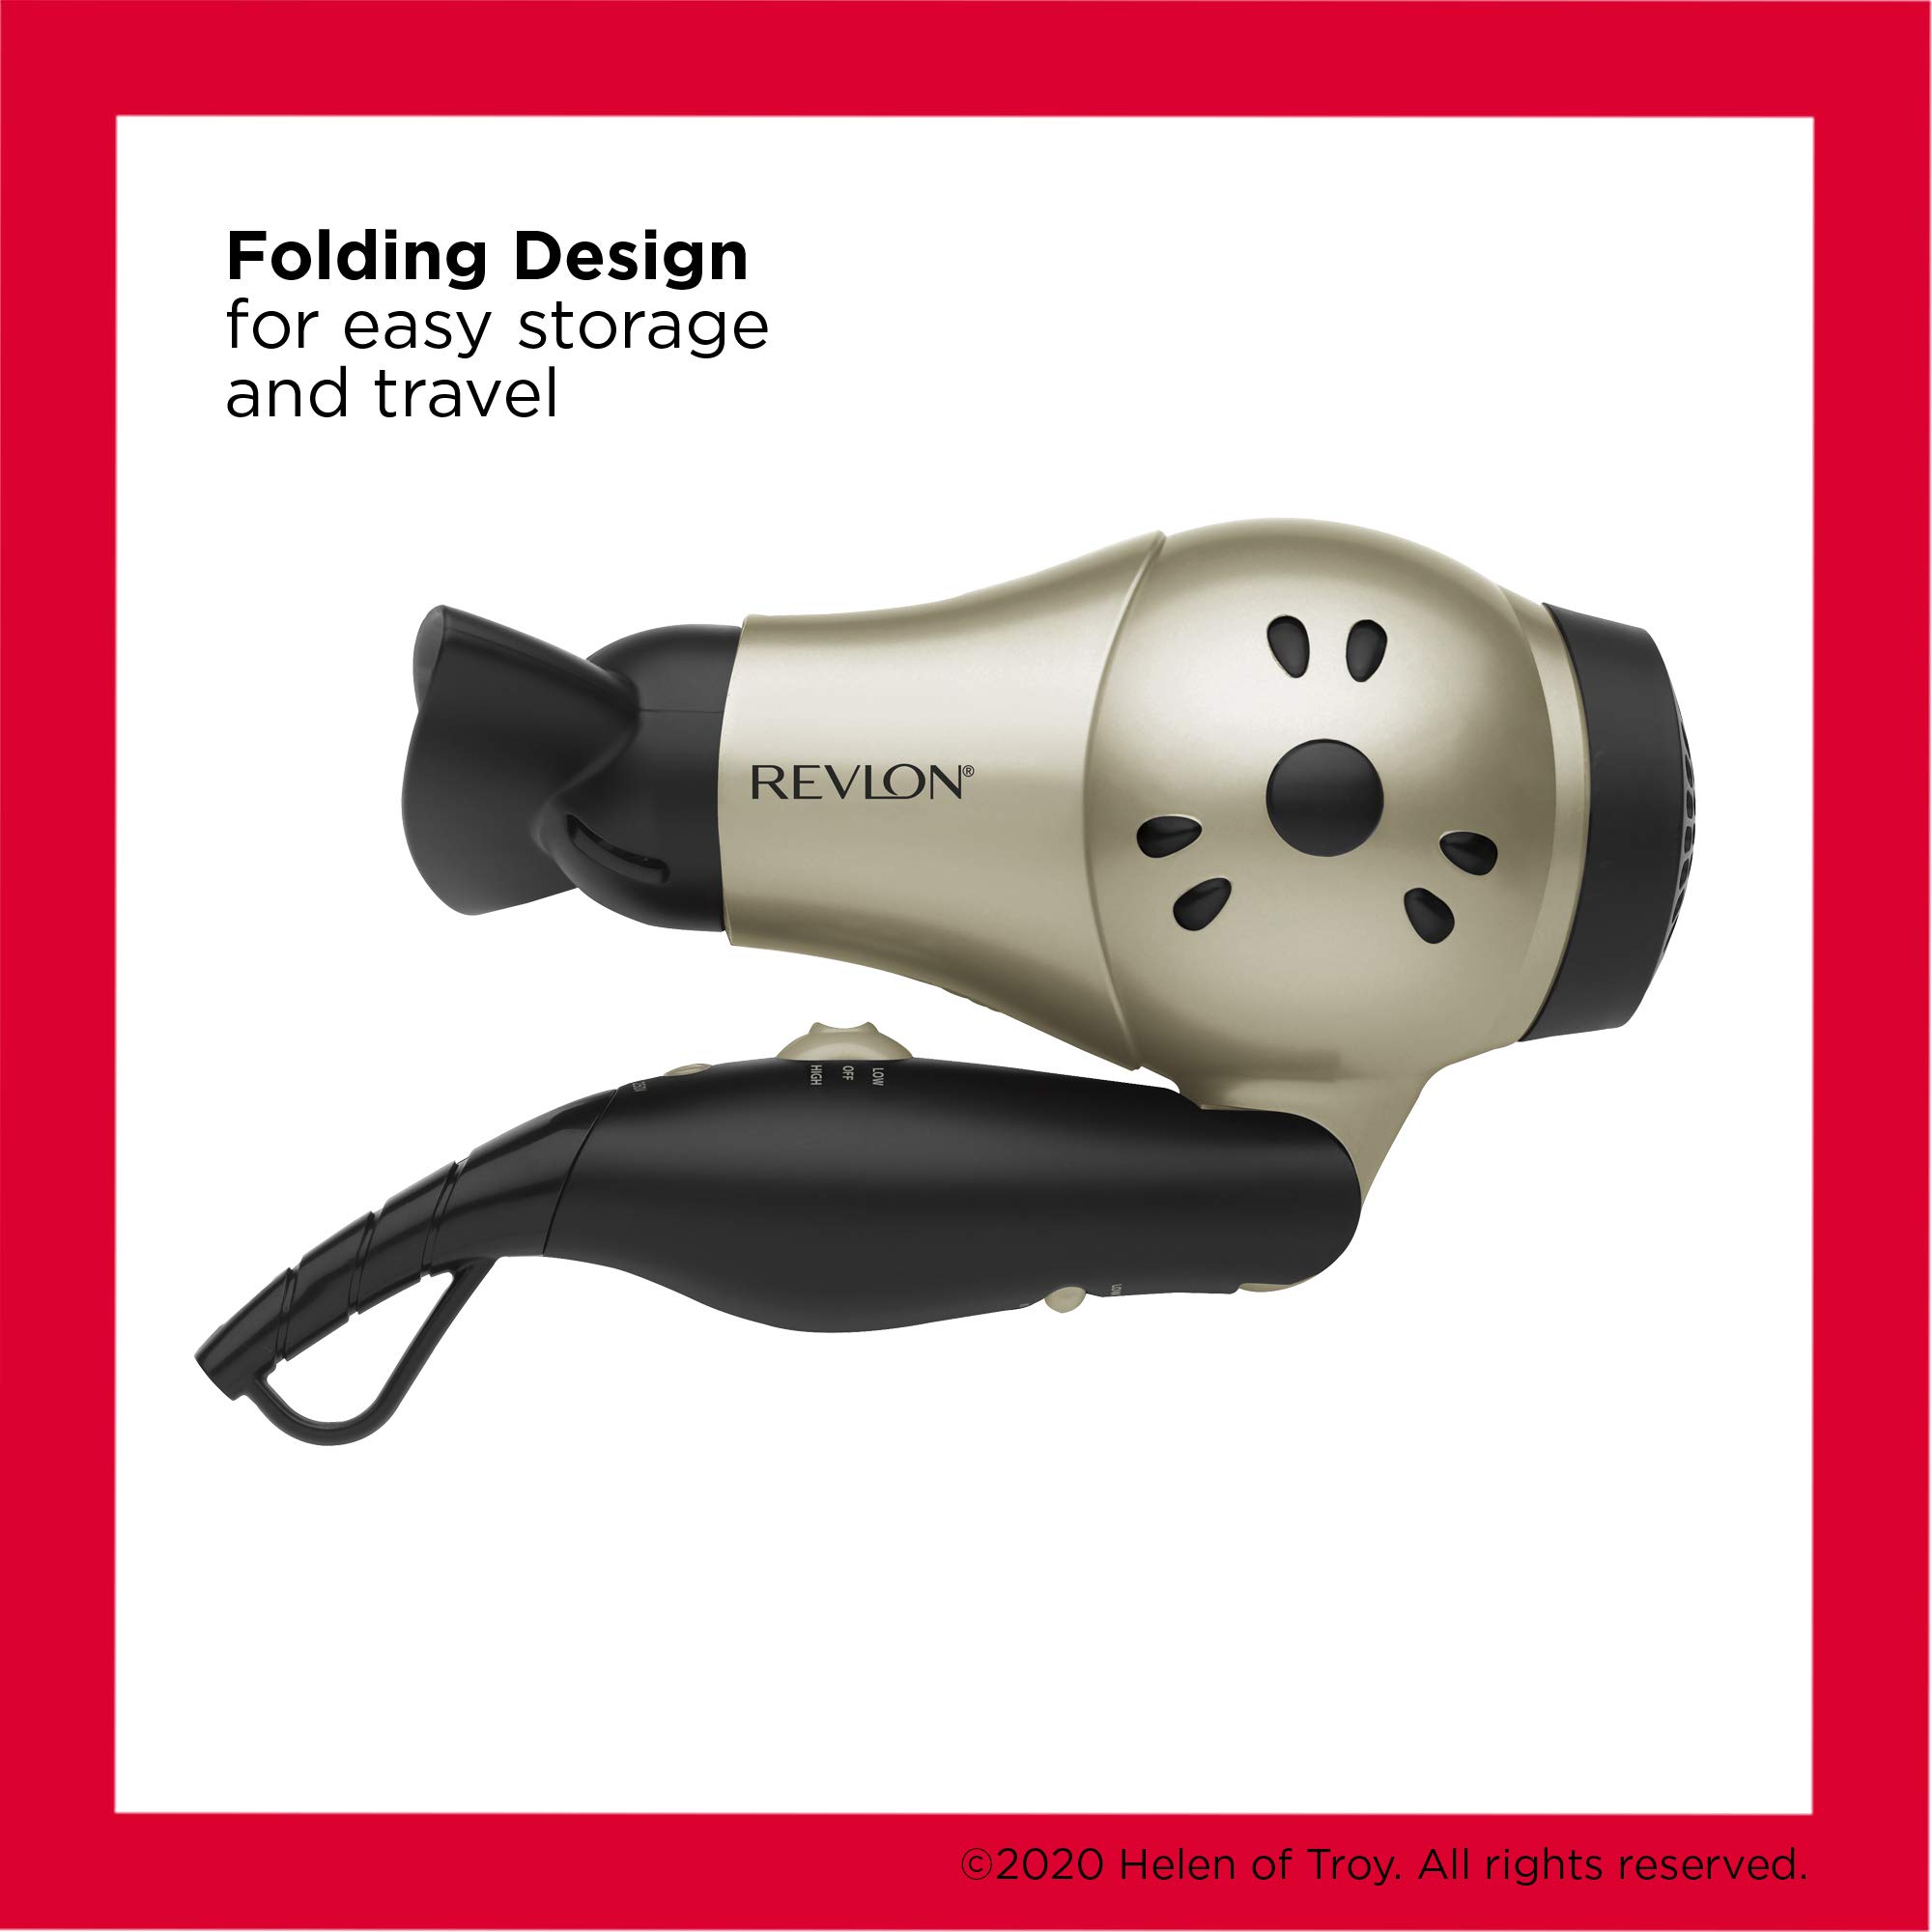 REVLON 1875W Compact Folding Handle Hair Dryer | Great for Travel